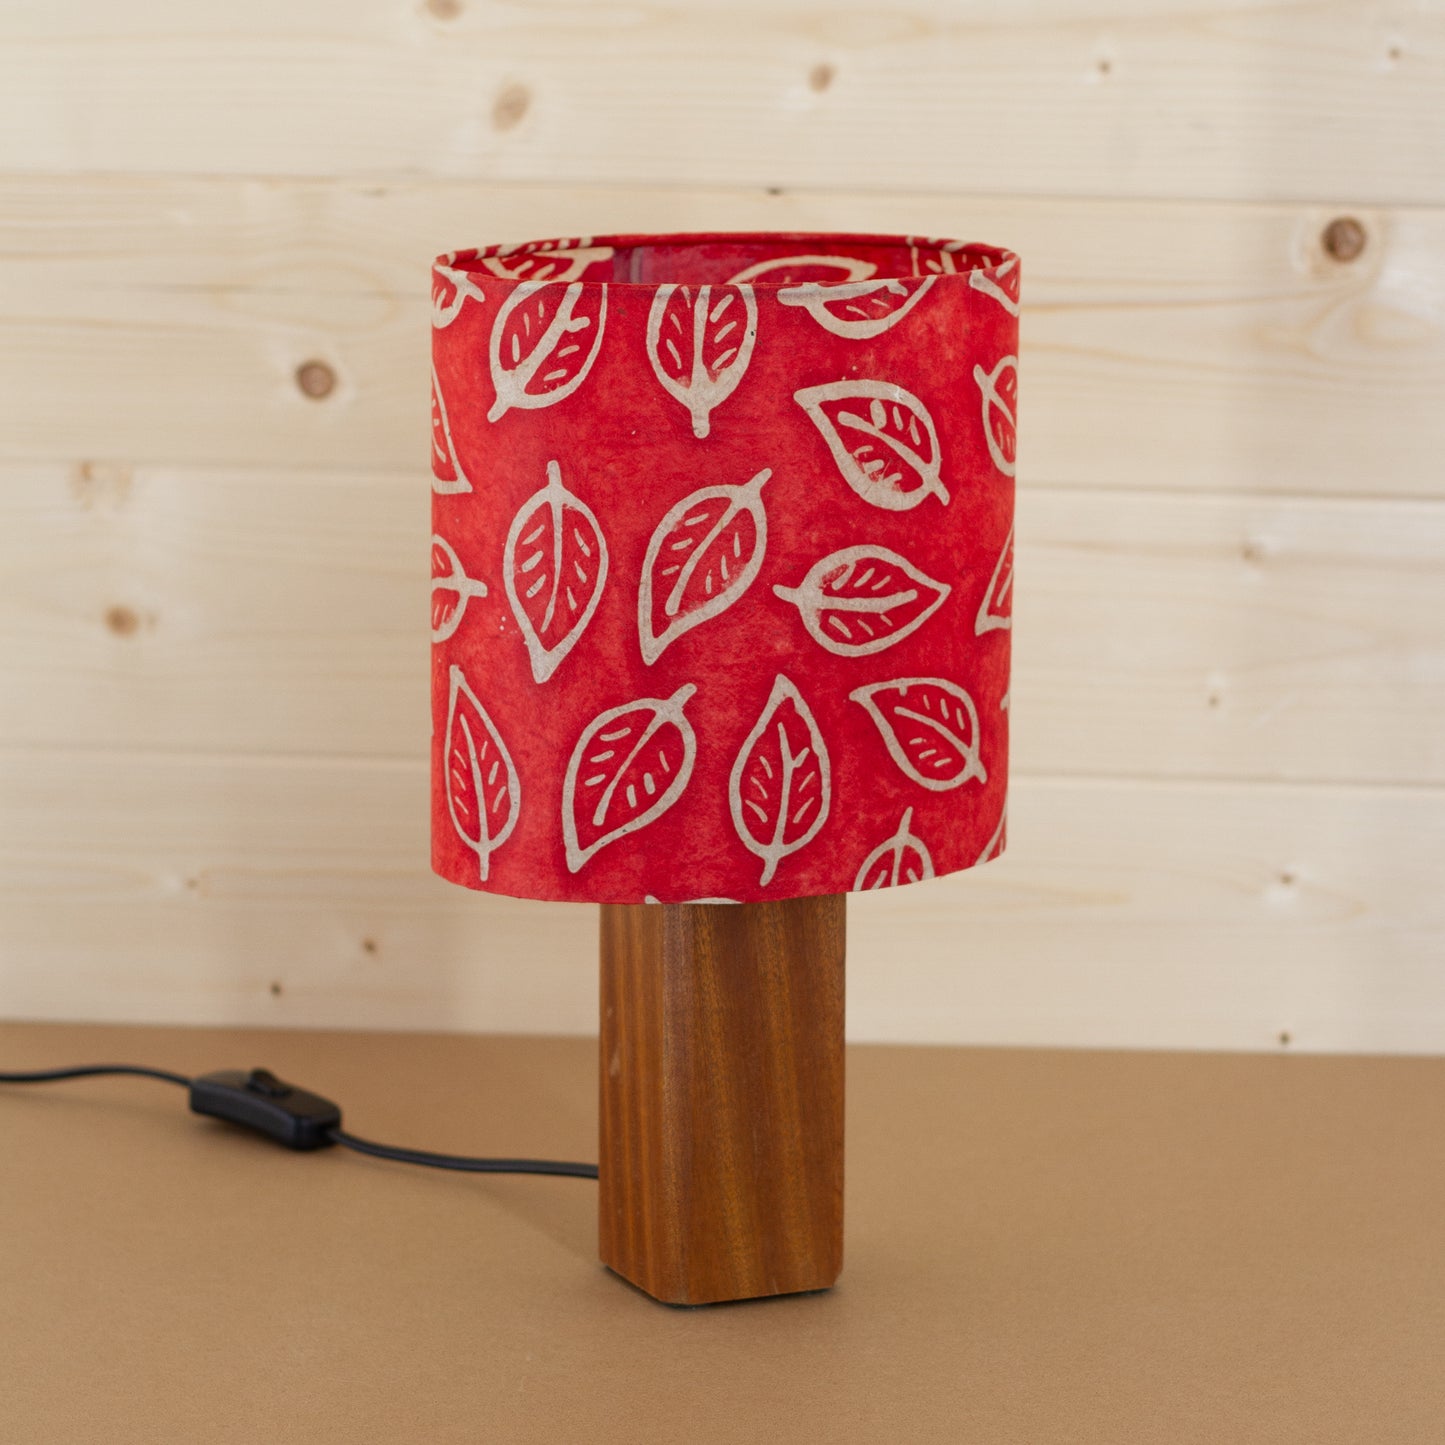 Square Sapele Table Lamp with 20cm Oval Lamp Shade P30 - Batik Leaf on Red